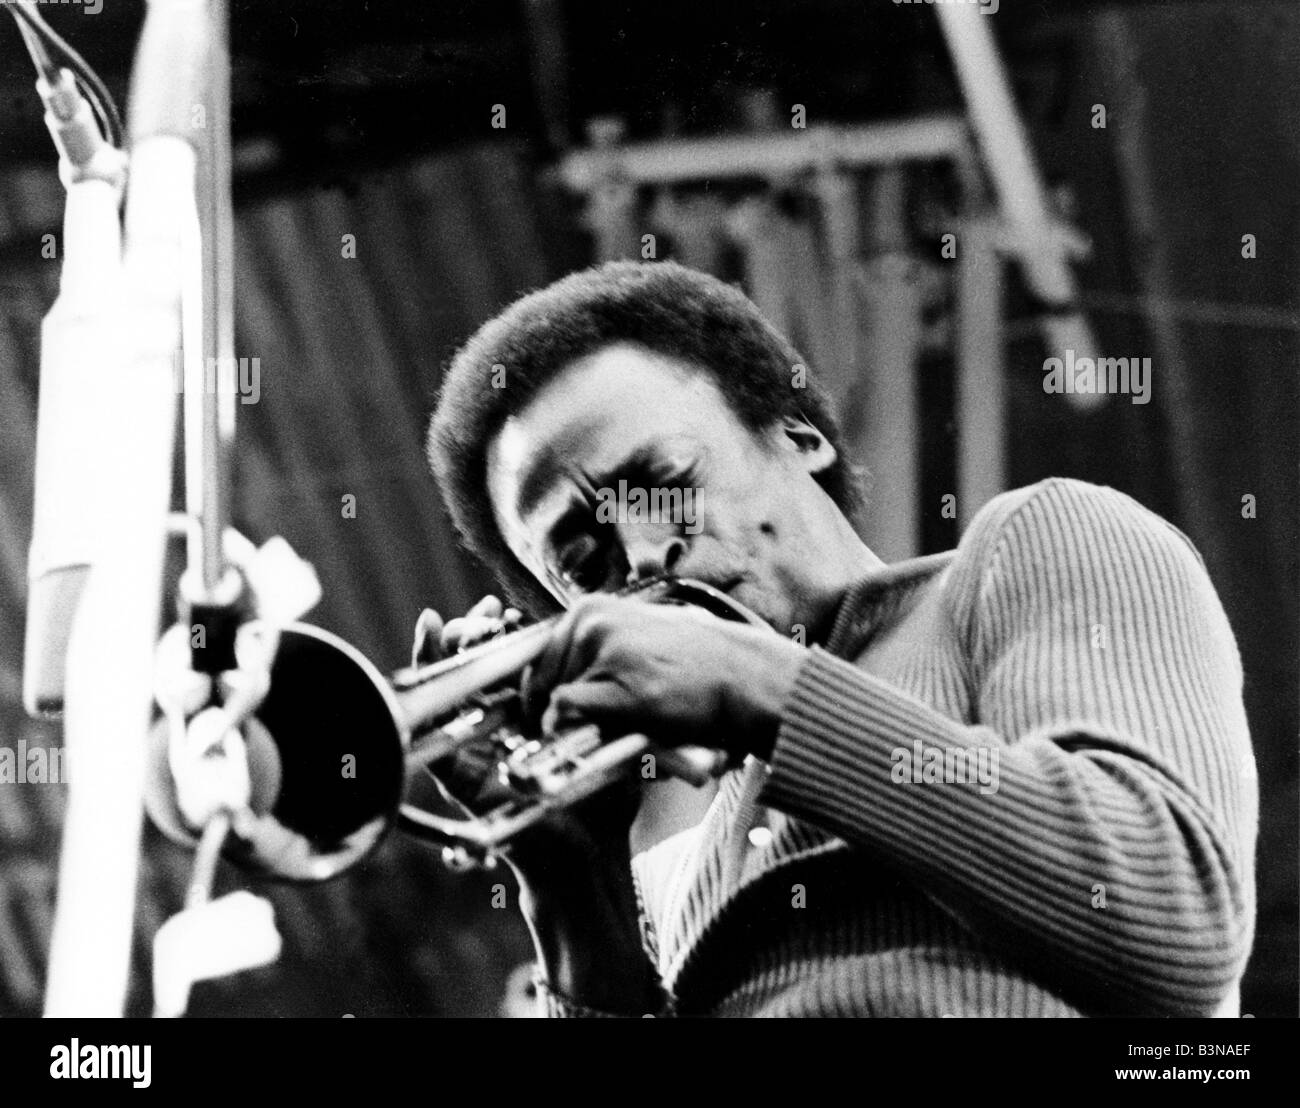 MILES DAVIS  US jazz musician at the 1970 Isle of Wight Festival in England Stock Photo